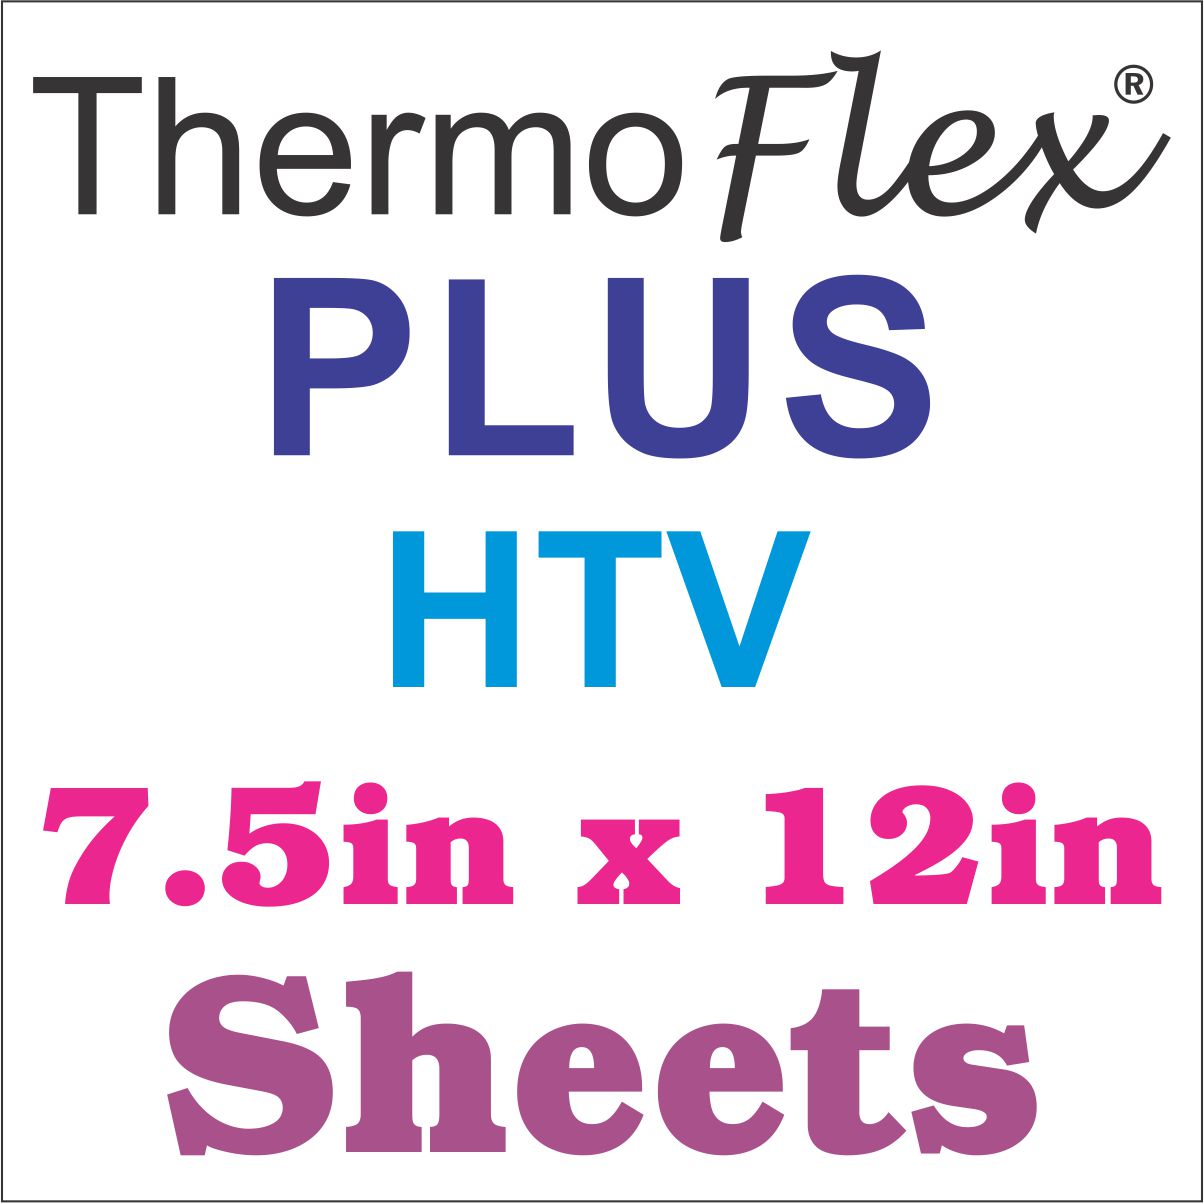 ThermoFlex Plus HTV 7.5in x 12in Sheets SALE While Supplies Last